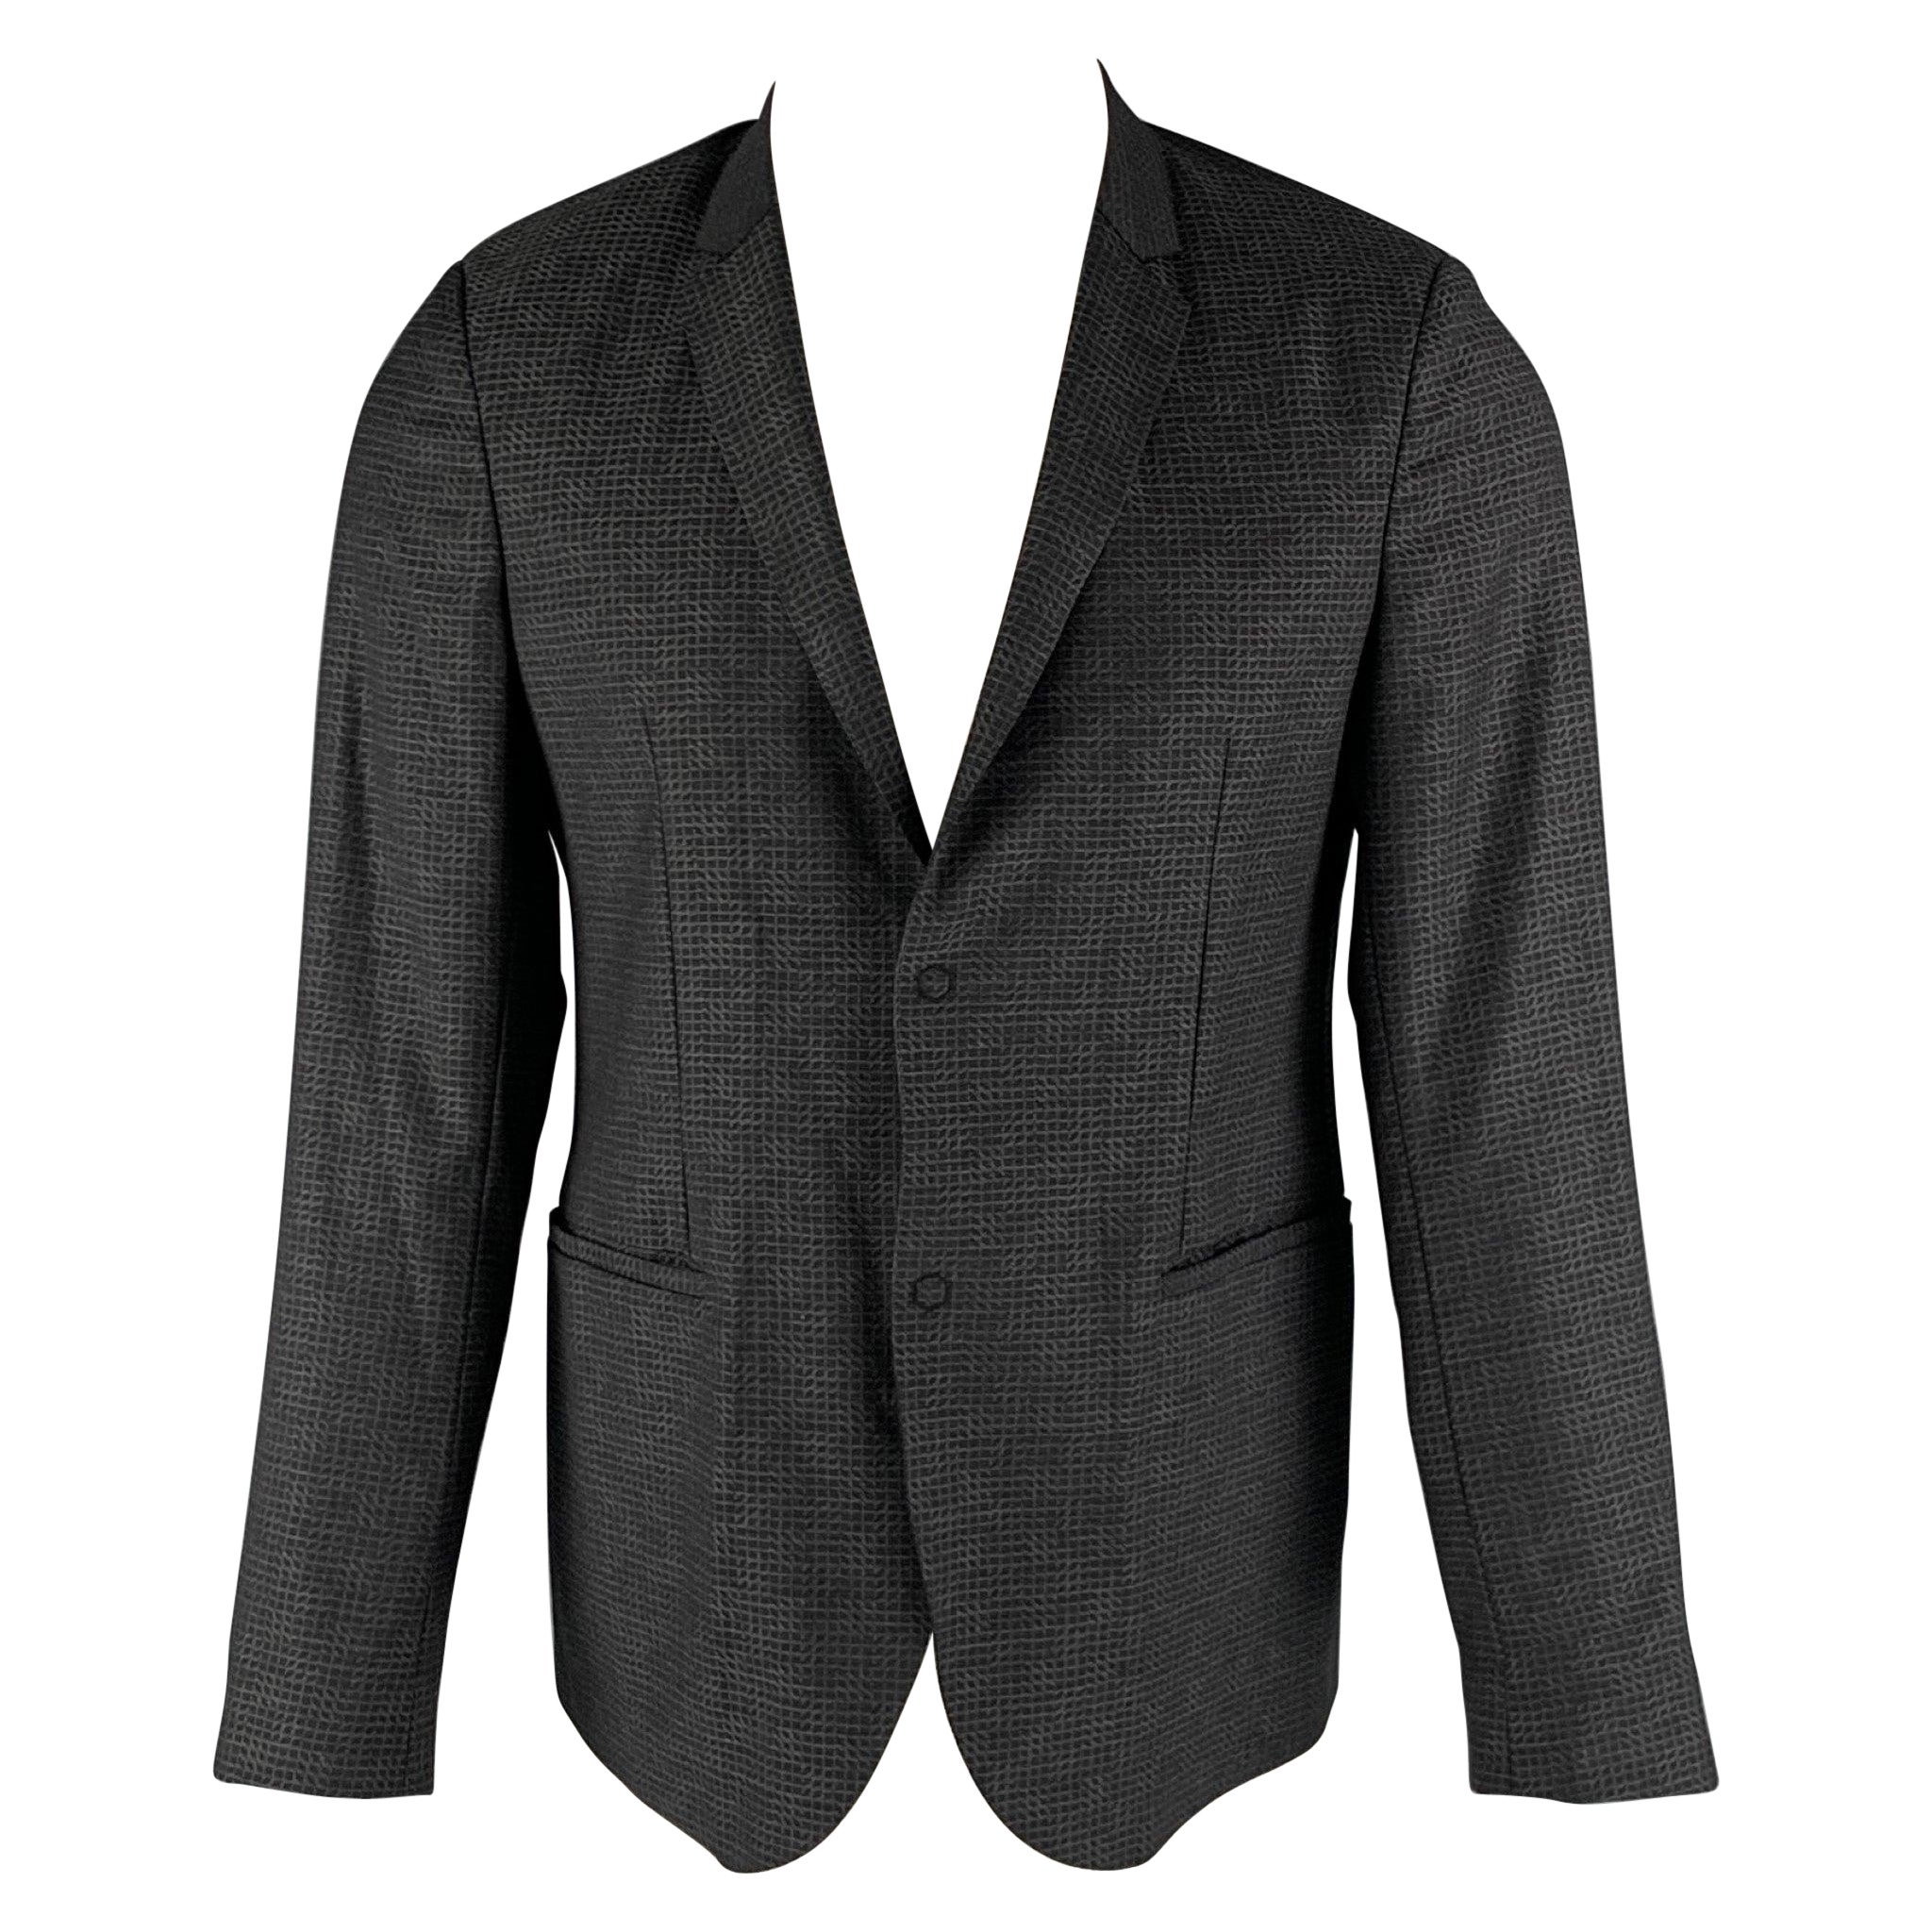 EMPORIO ARMANI Size 38 Charcoal Grey Wool Notch Lapel Sport Coat For Sale